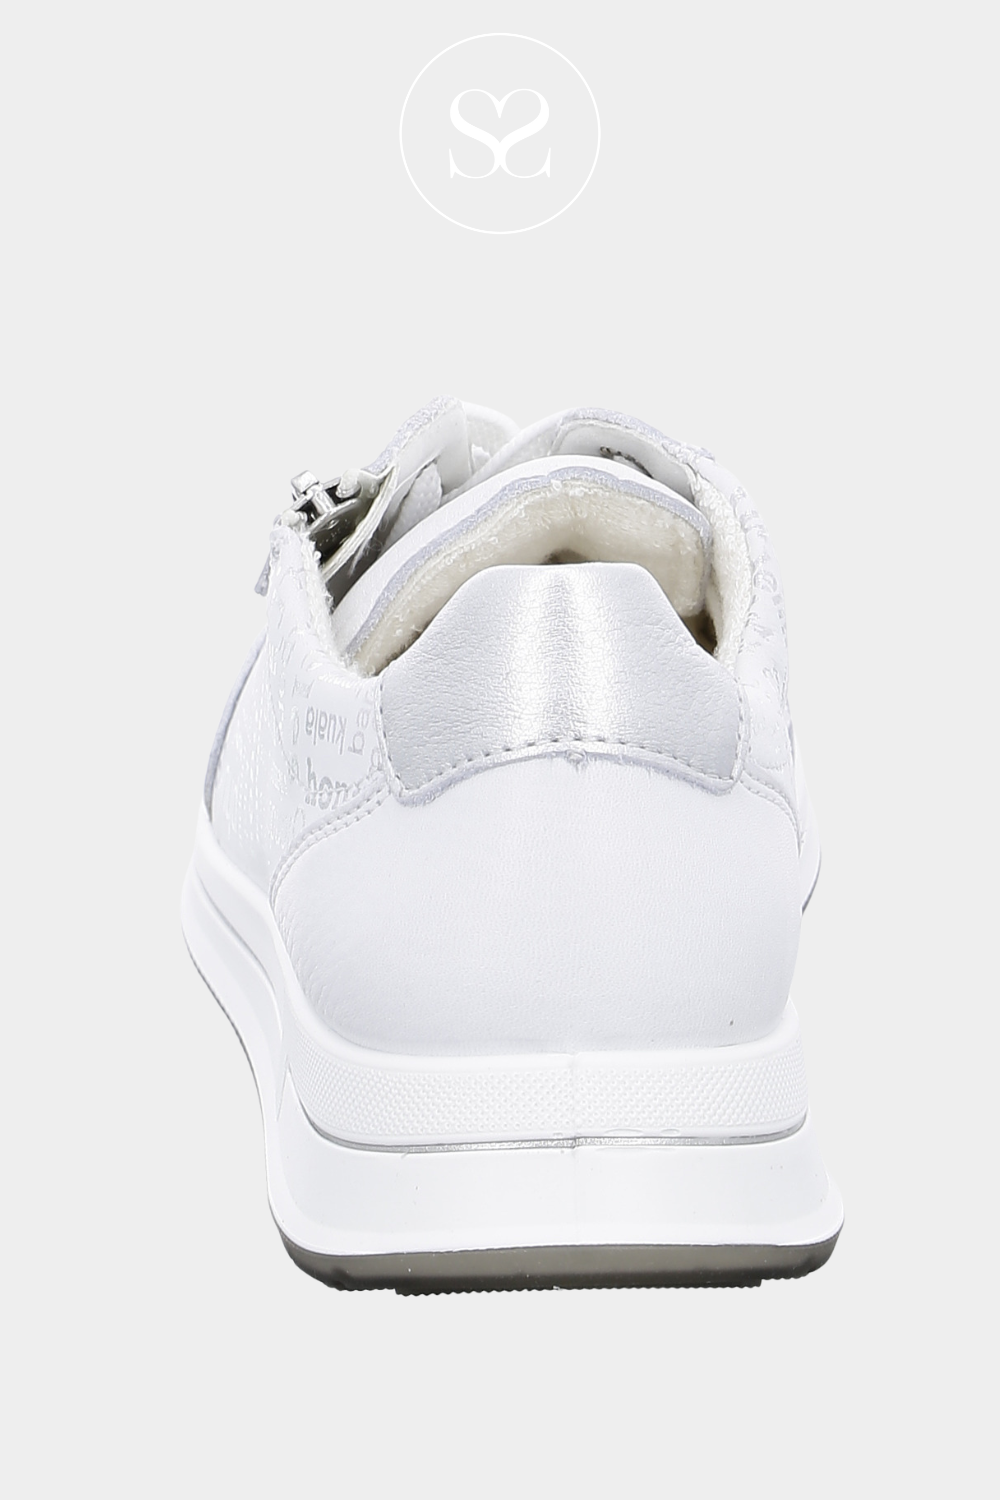 ARA 12-24801-09 WHITE LEATHER TRAINERS WITH SILVER BRANDING, LACES AND SIDE ZIP